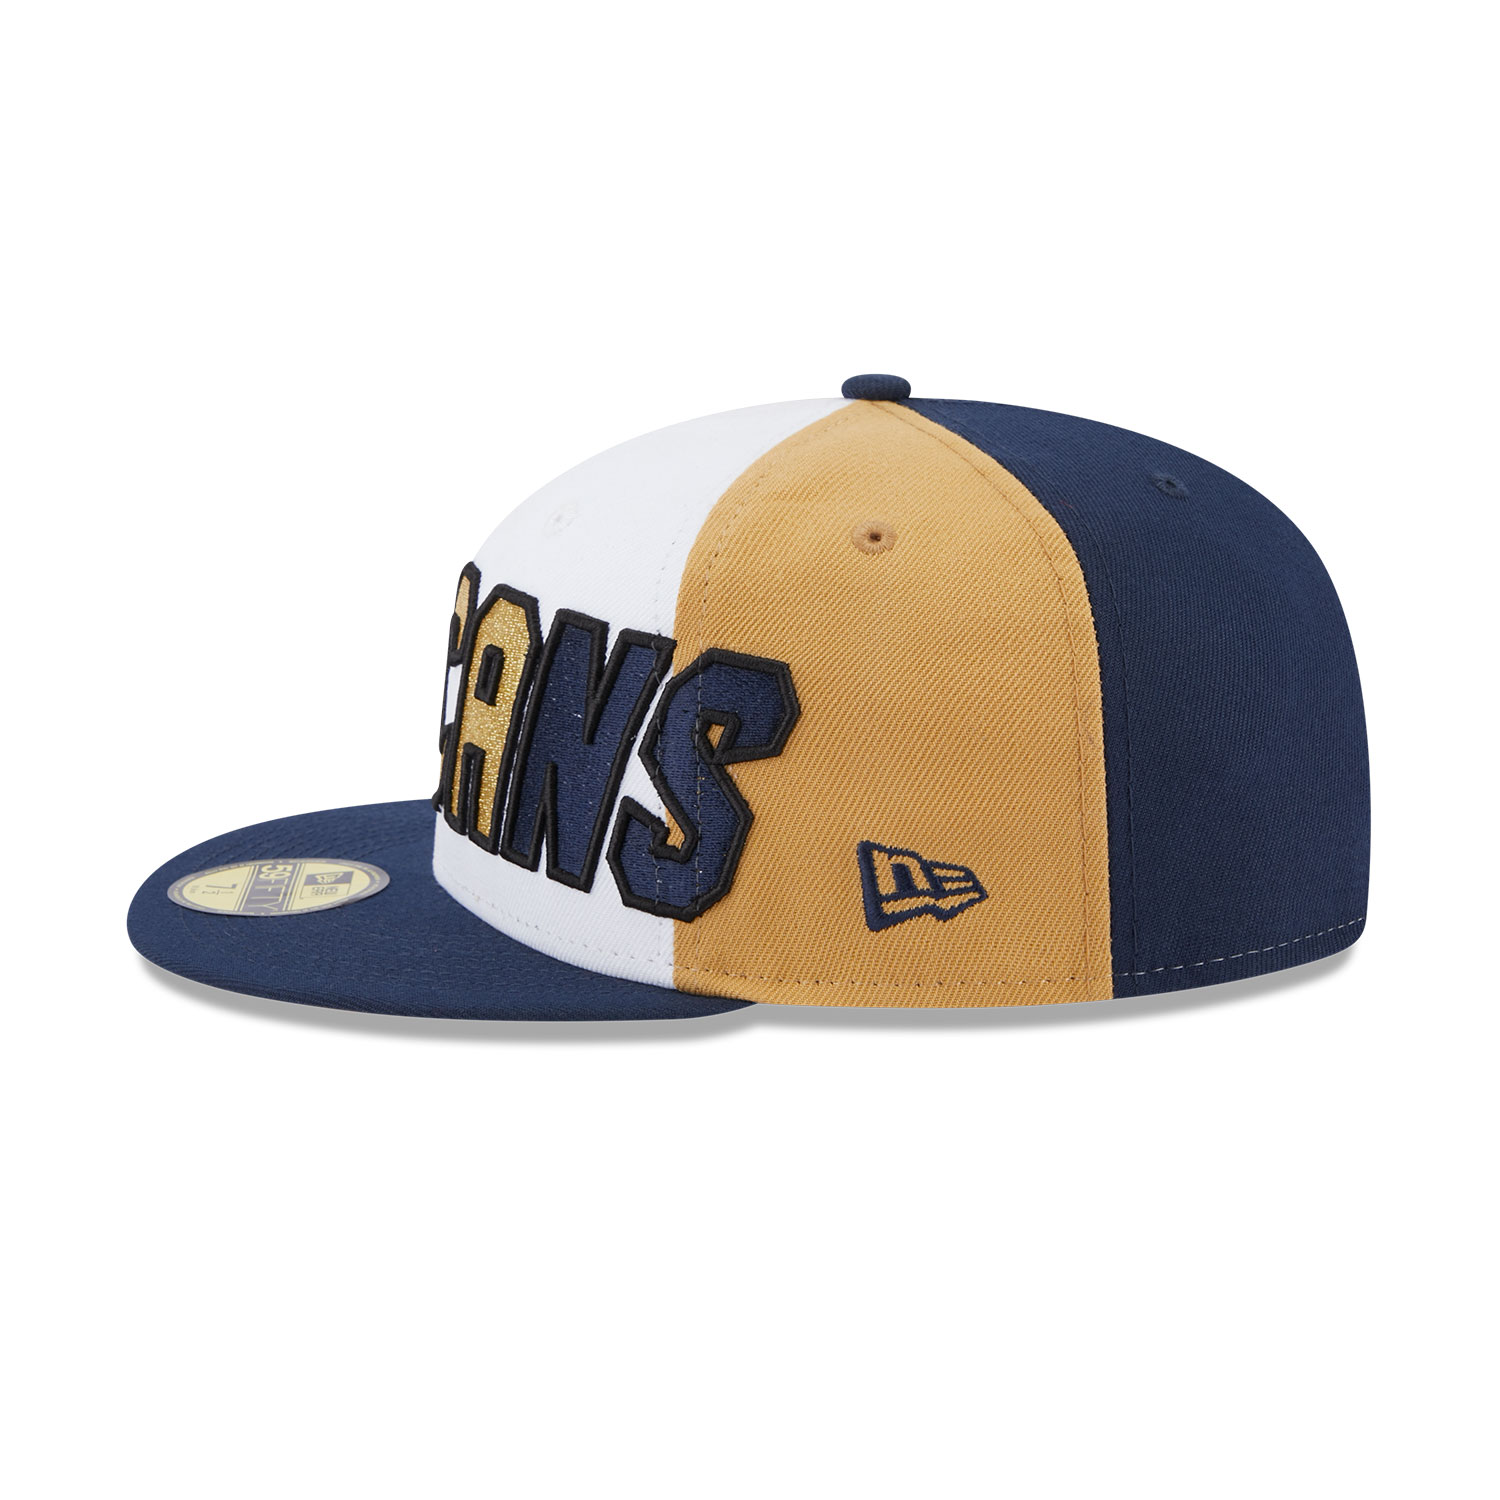 New Orleans Pelicans NBA Back Half Blue 59FIFTY Fitted Cap